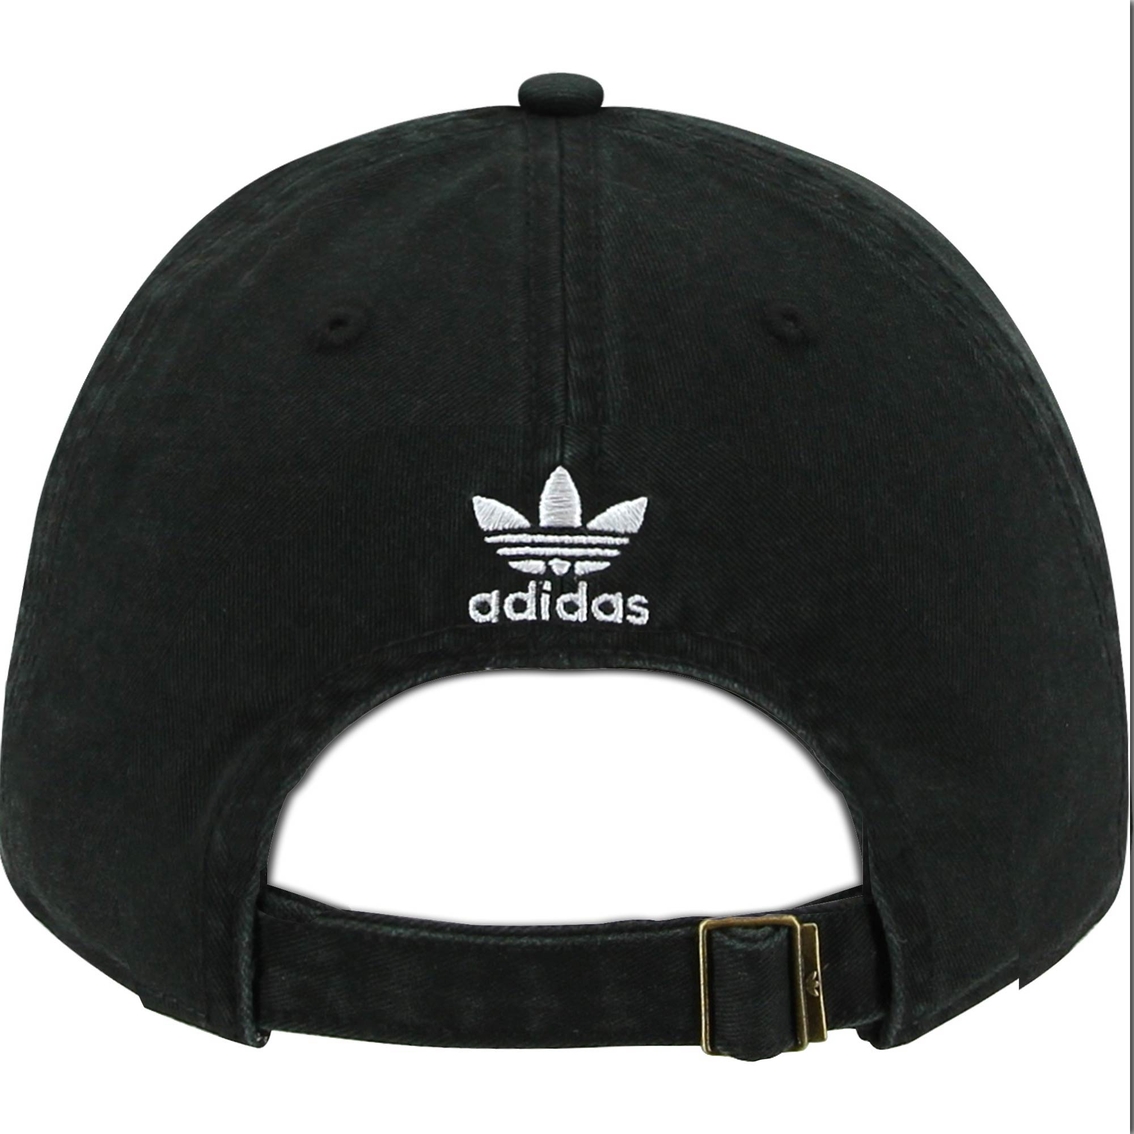 adidas Originals Relaxed Strapback Hat - Image 4 of 4